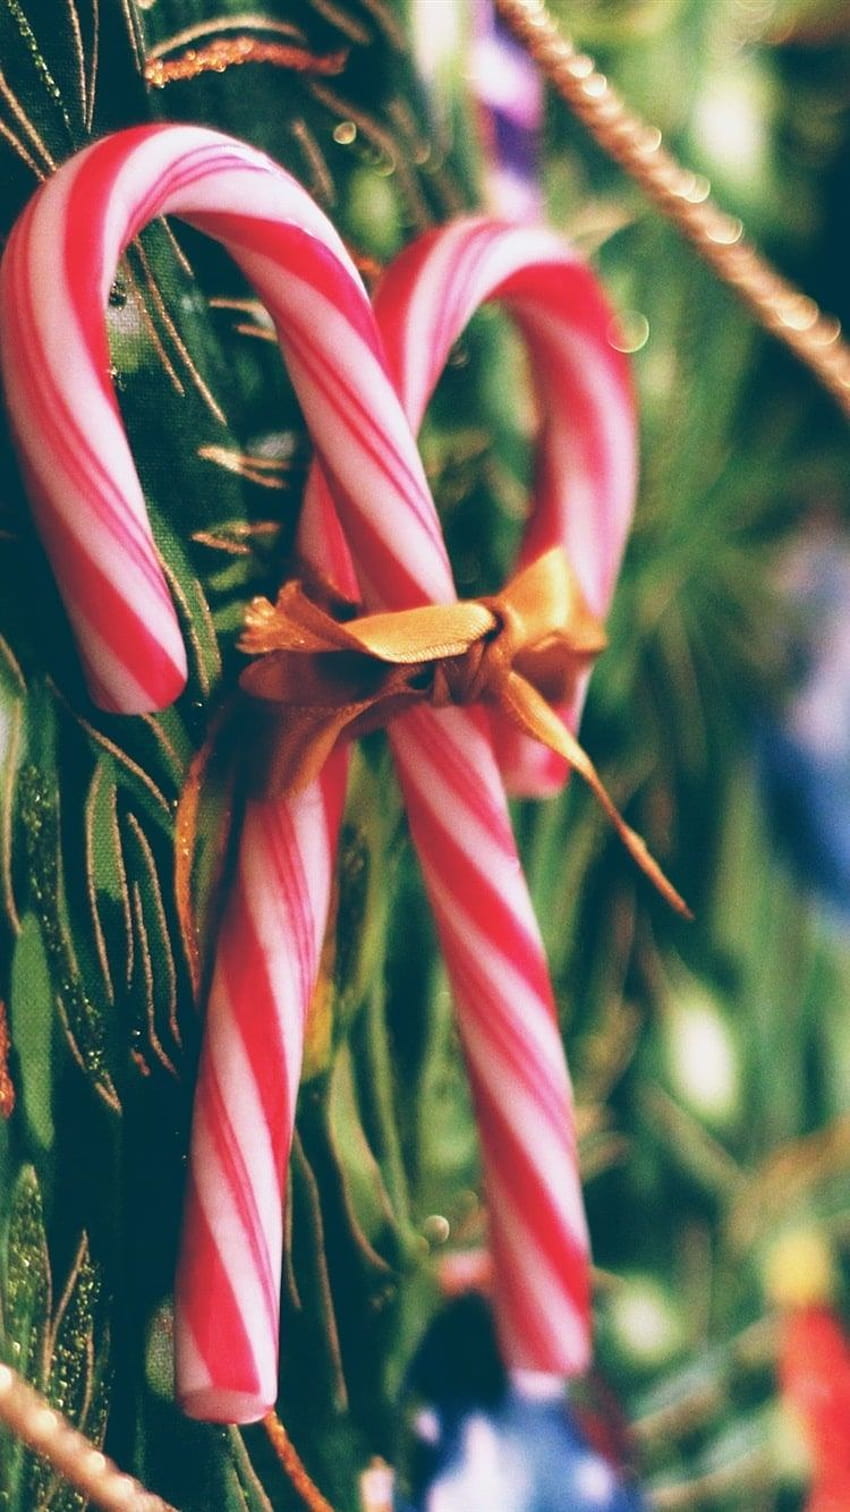 A pair of candy canes are tied with a gold ribbon and hang from a tree. - Candy cane